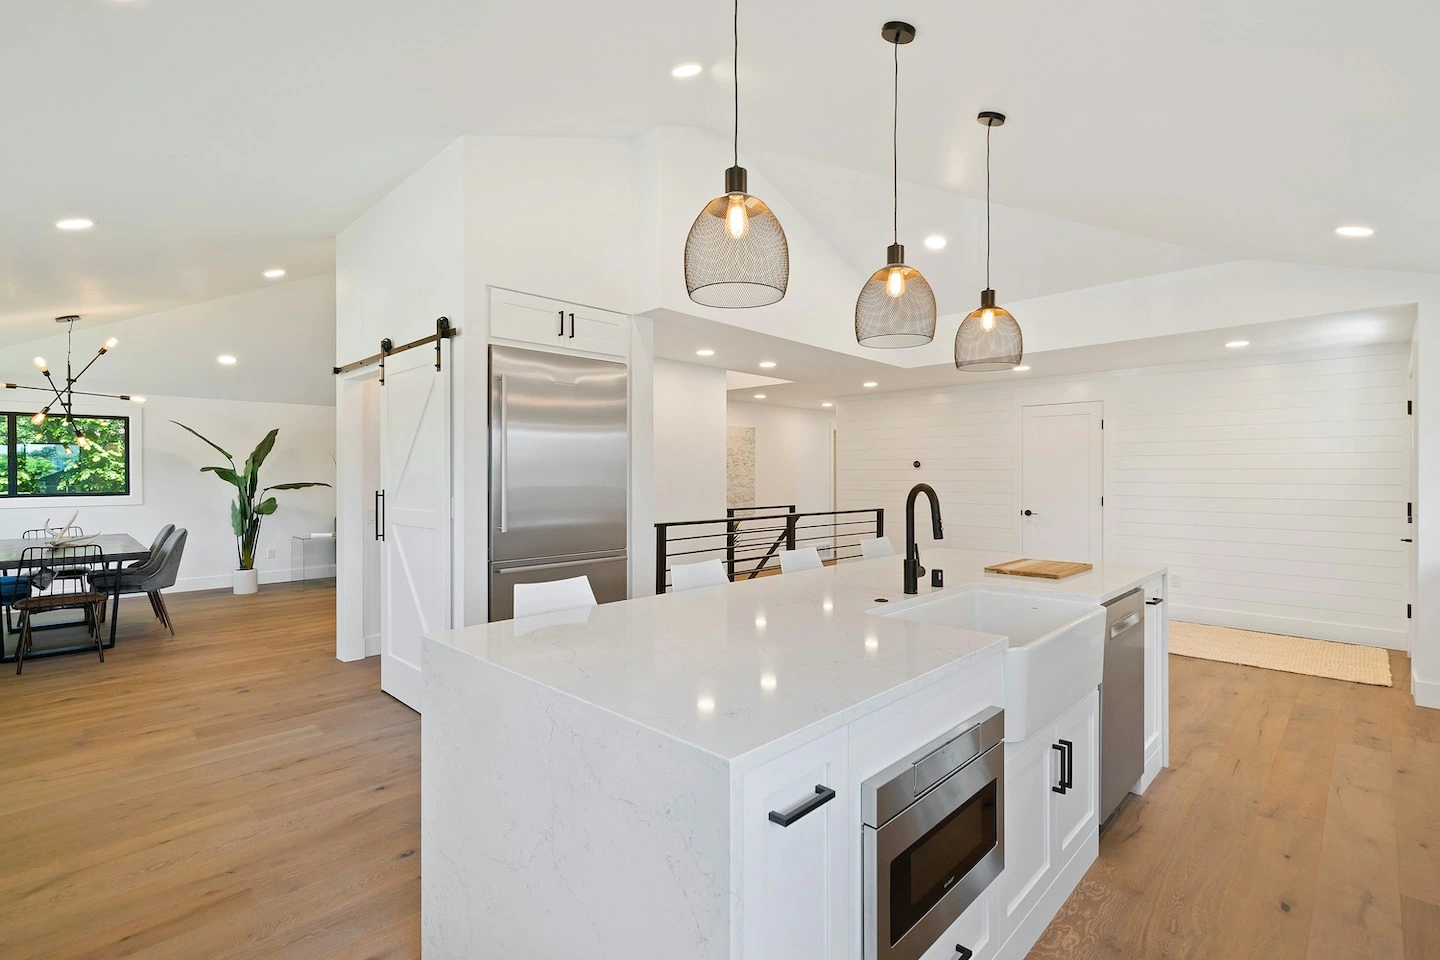 Kitchen of home in Del Valle with white countertops and three pendant lights.